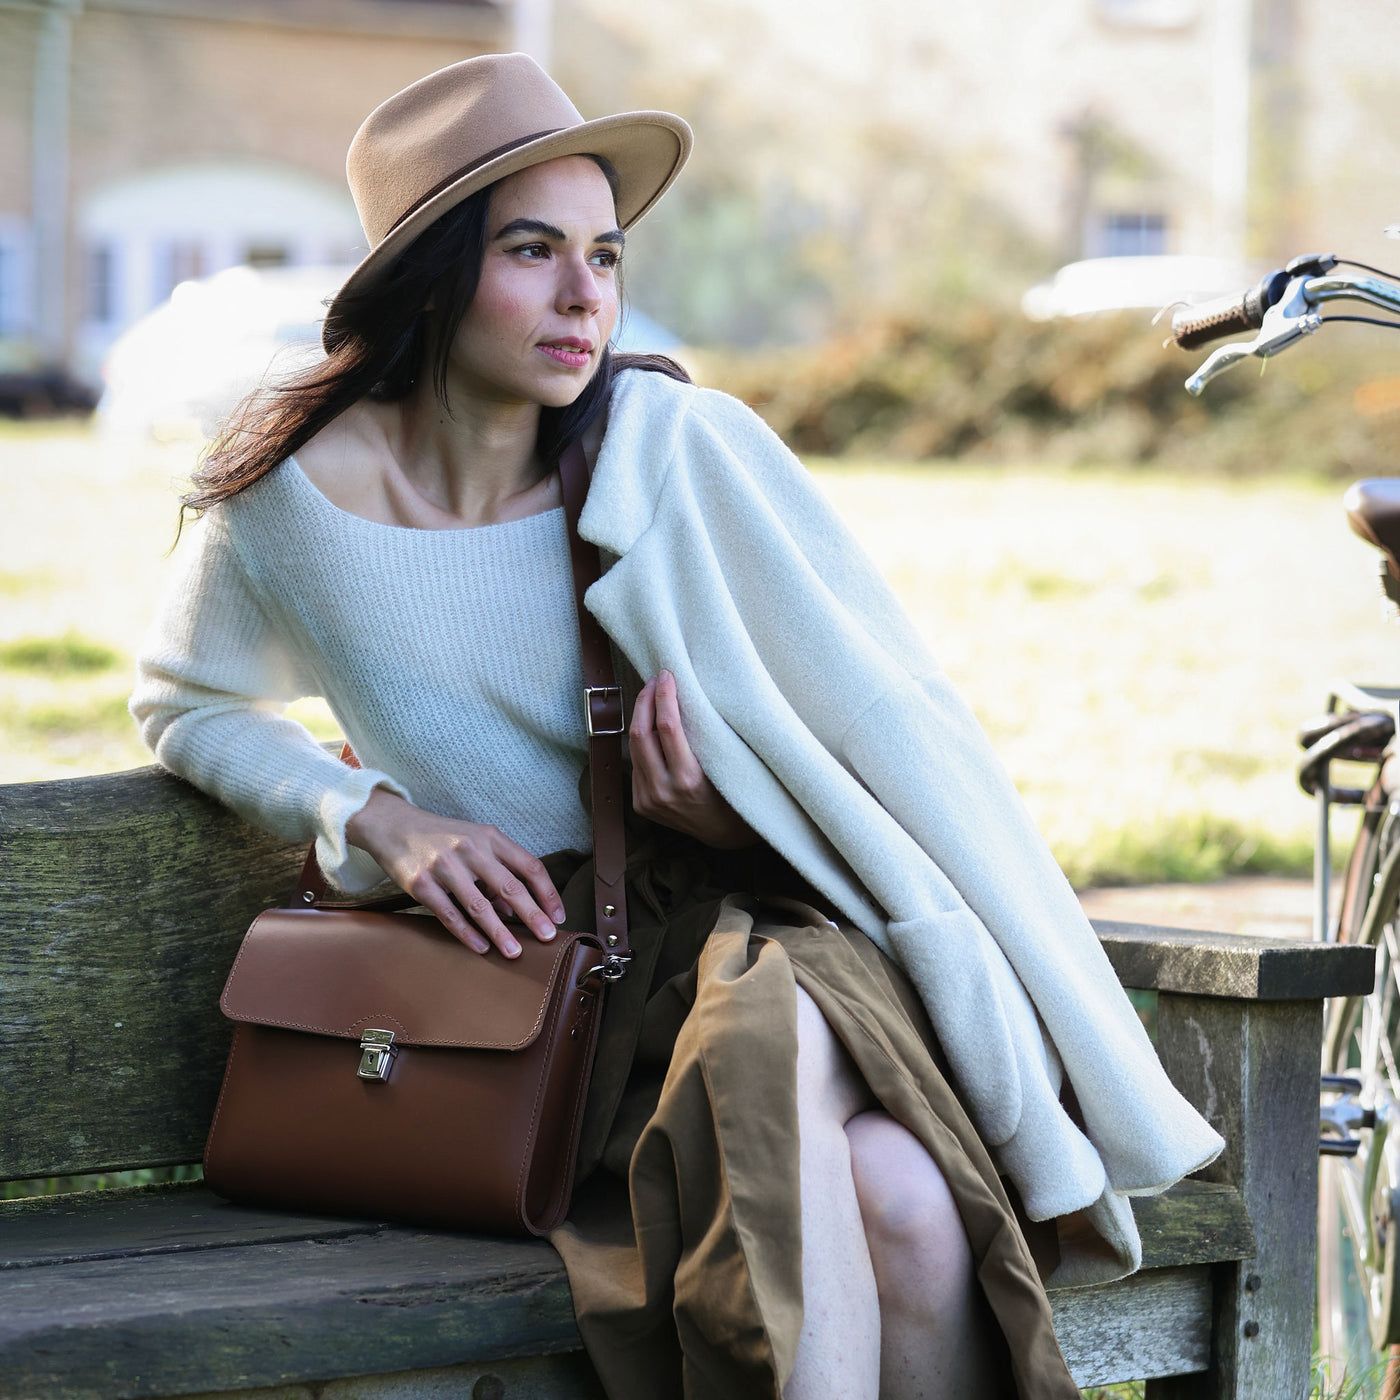 Picture of women's stylish bike bag in the style of a chestnut brown leather satchel bike bag